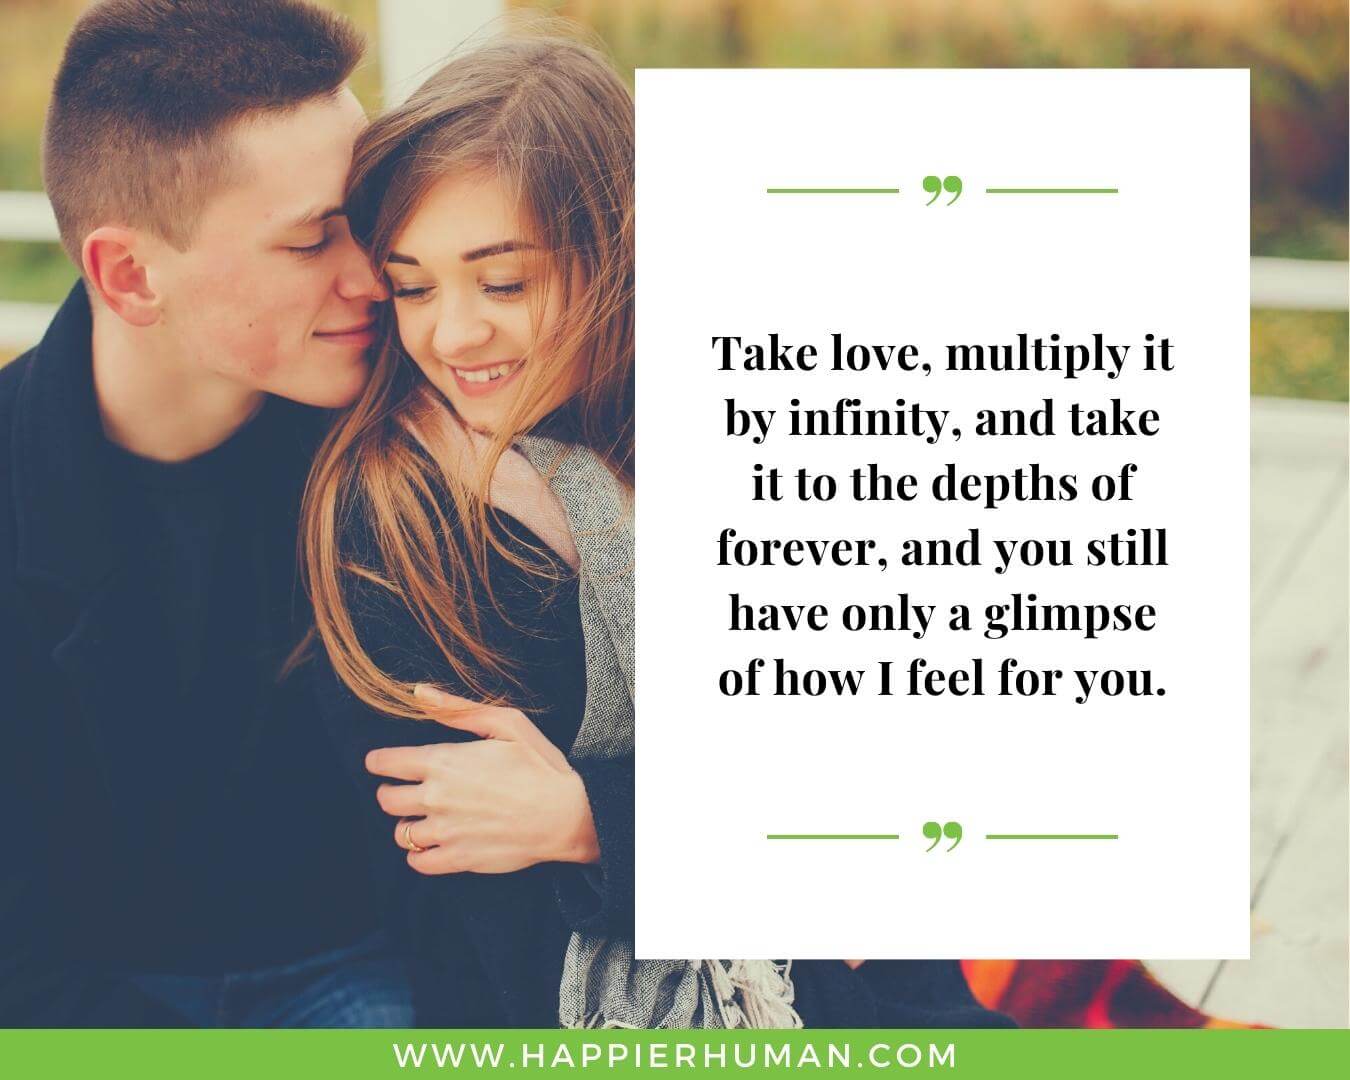 Romantic Quotes For Wife - “Take love, multiply it by infinity, and take it to the depths of forever, and you still have only a glimpse of how I feel for you.”